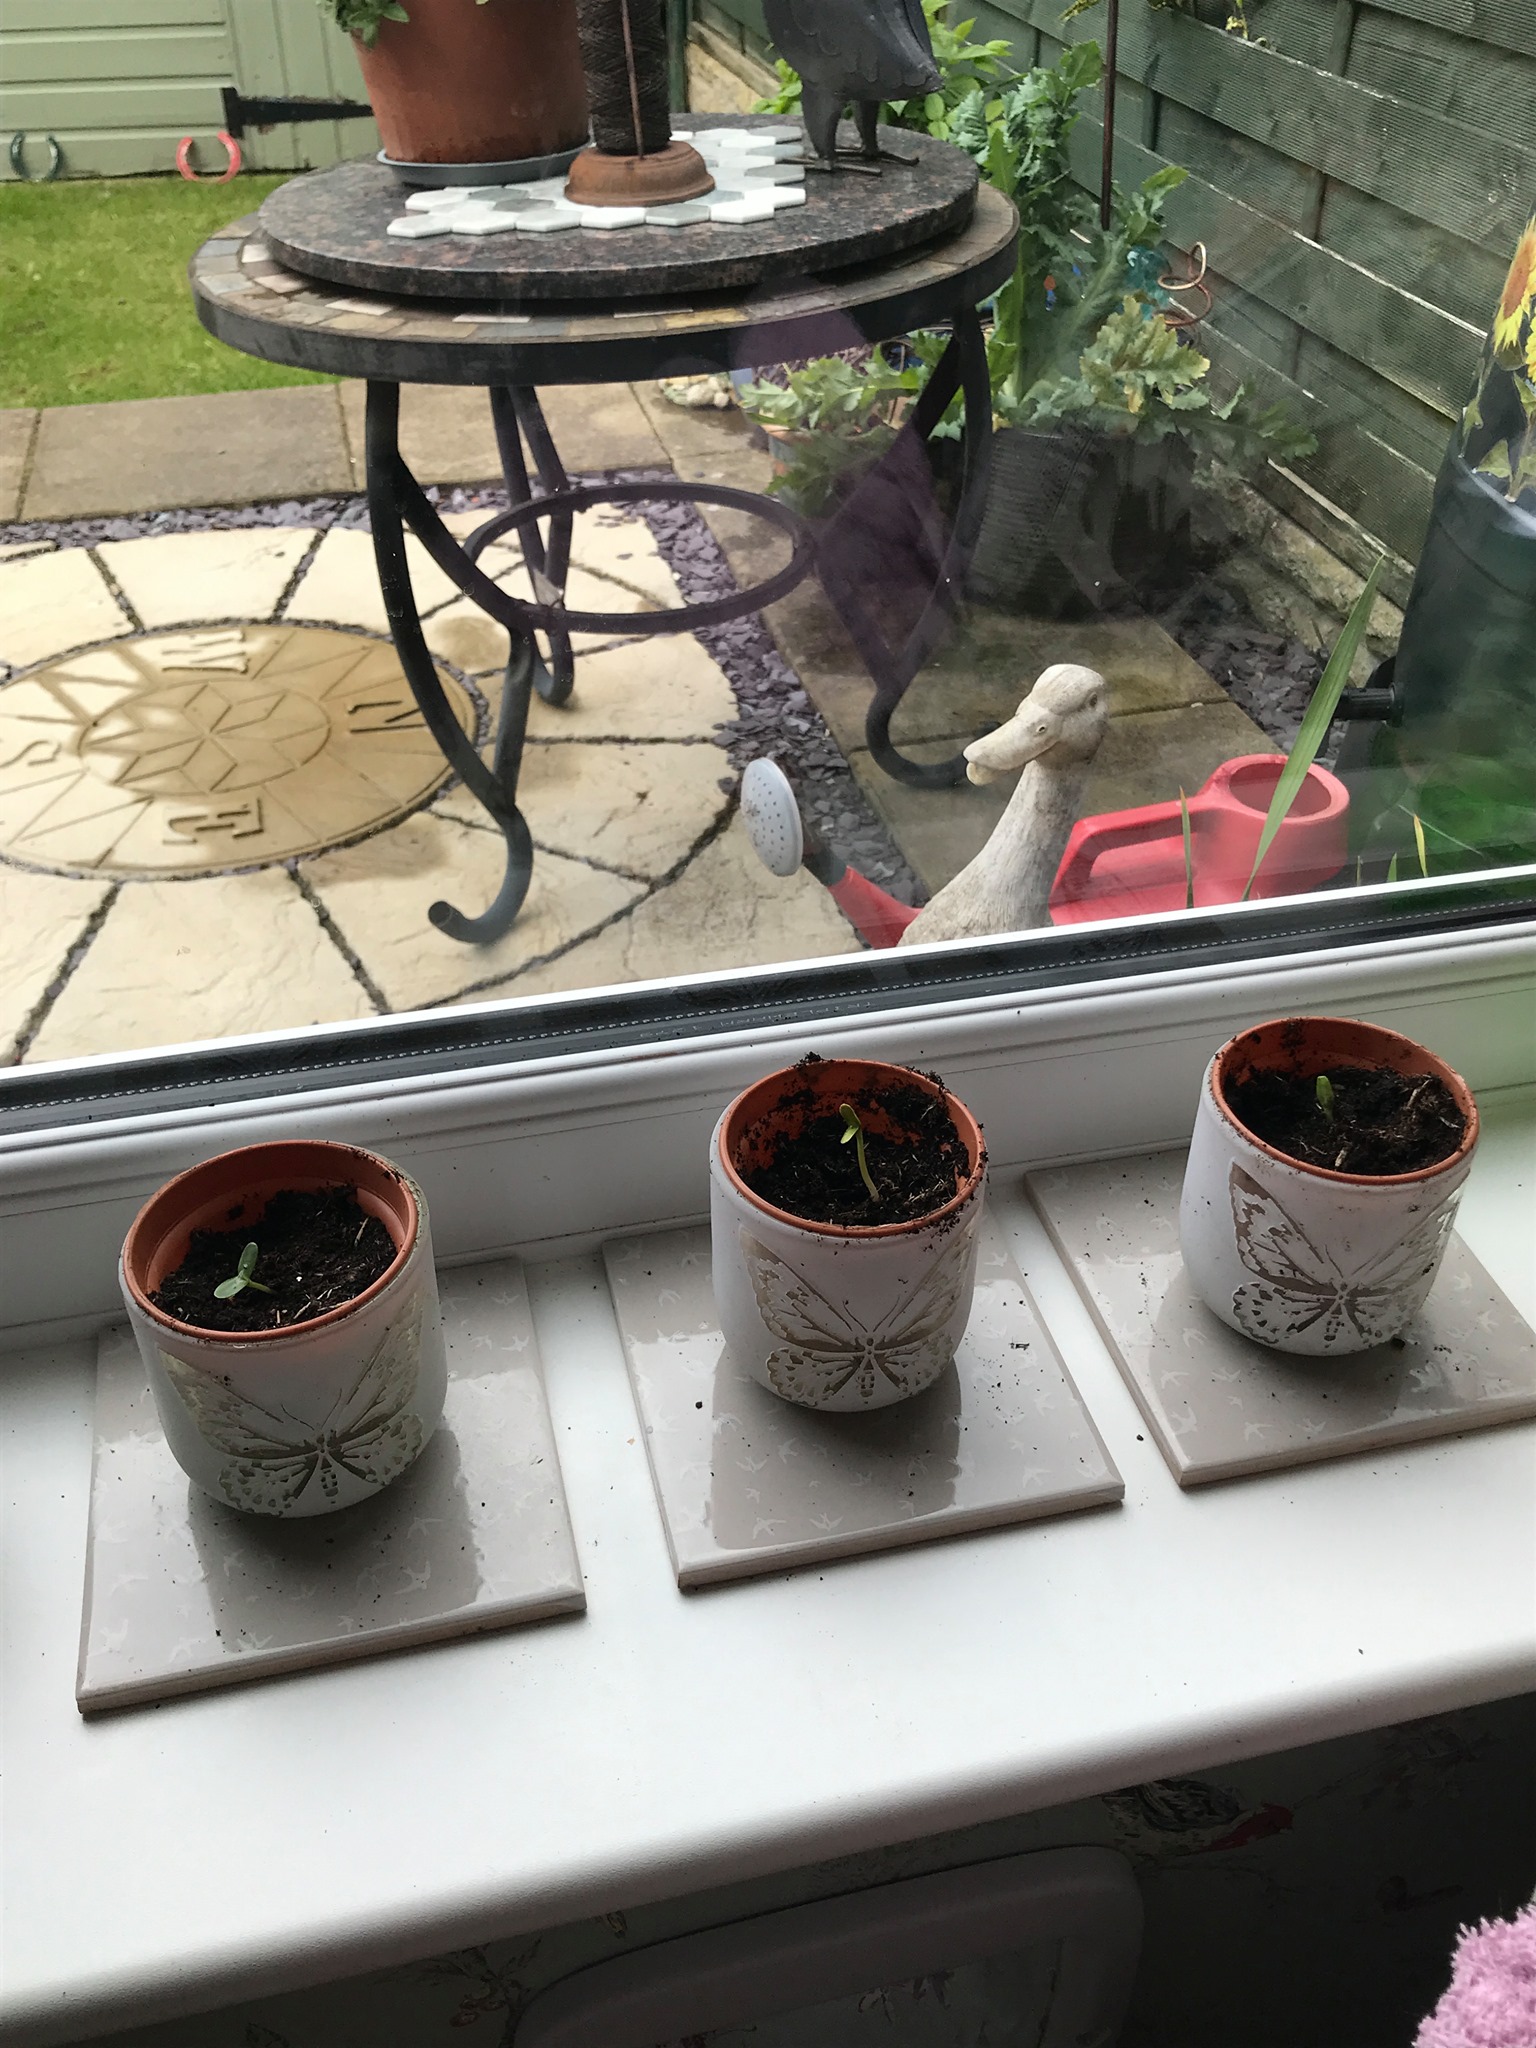 Jenny C - Coming along well, so proud of my little seedlings